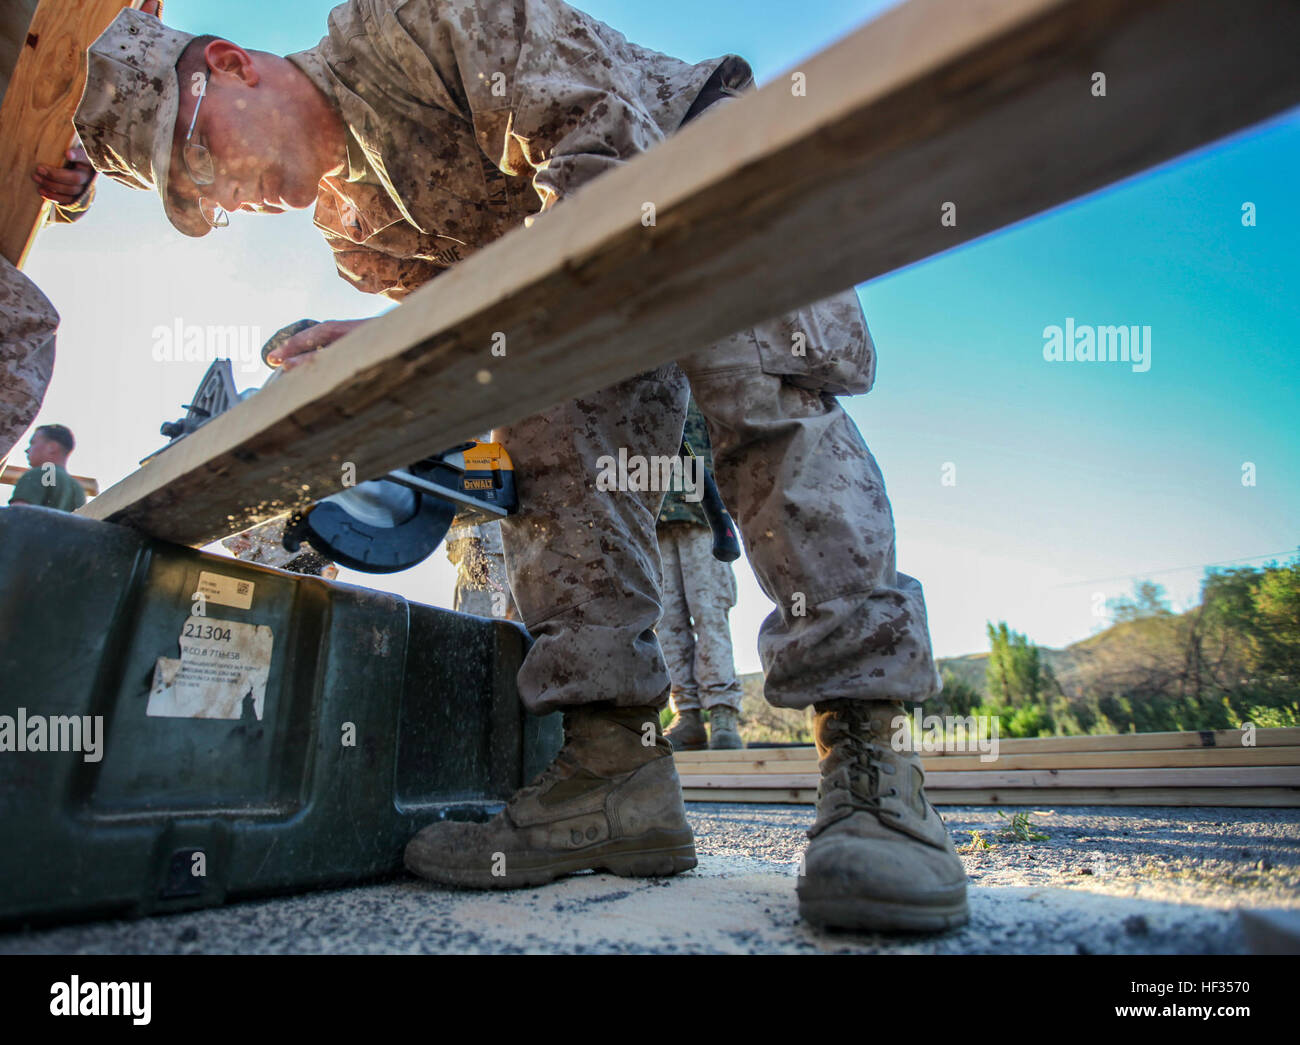 U.S. Marine Lance Cpl. Brandon Larue uses a saw to cut into wood planks to build Southwest Asia huts in support of a simulated Foreign Humanitarian Assistance project during Composite Training Unit Exercise (COMPTUEX) aboard Camp Pendleton, Calif., March 27, 2015. Larue is a combat engineer with the Combat Logistics Battalion 15, 15th Marine Expeditionary Unit. The 15th MEU’s combat logistics element is training to be able to provide humanitarian assistance and engineering support like building SWA huts for when they deploy in the spring. (U.S. Marine Corps photo by Cpl. Elize McKelvey/Release Stock Photo